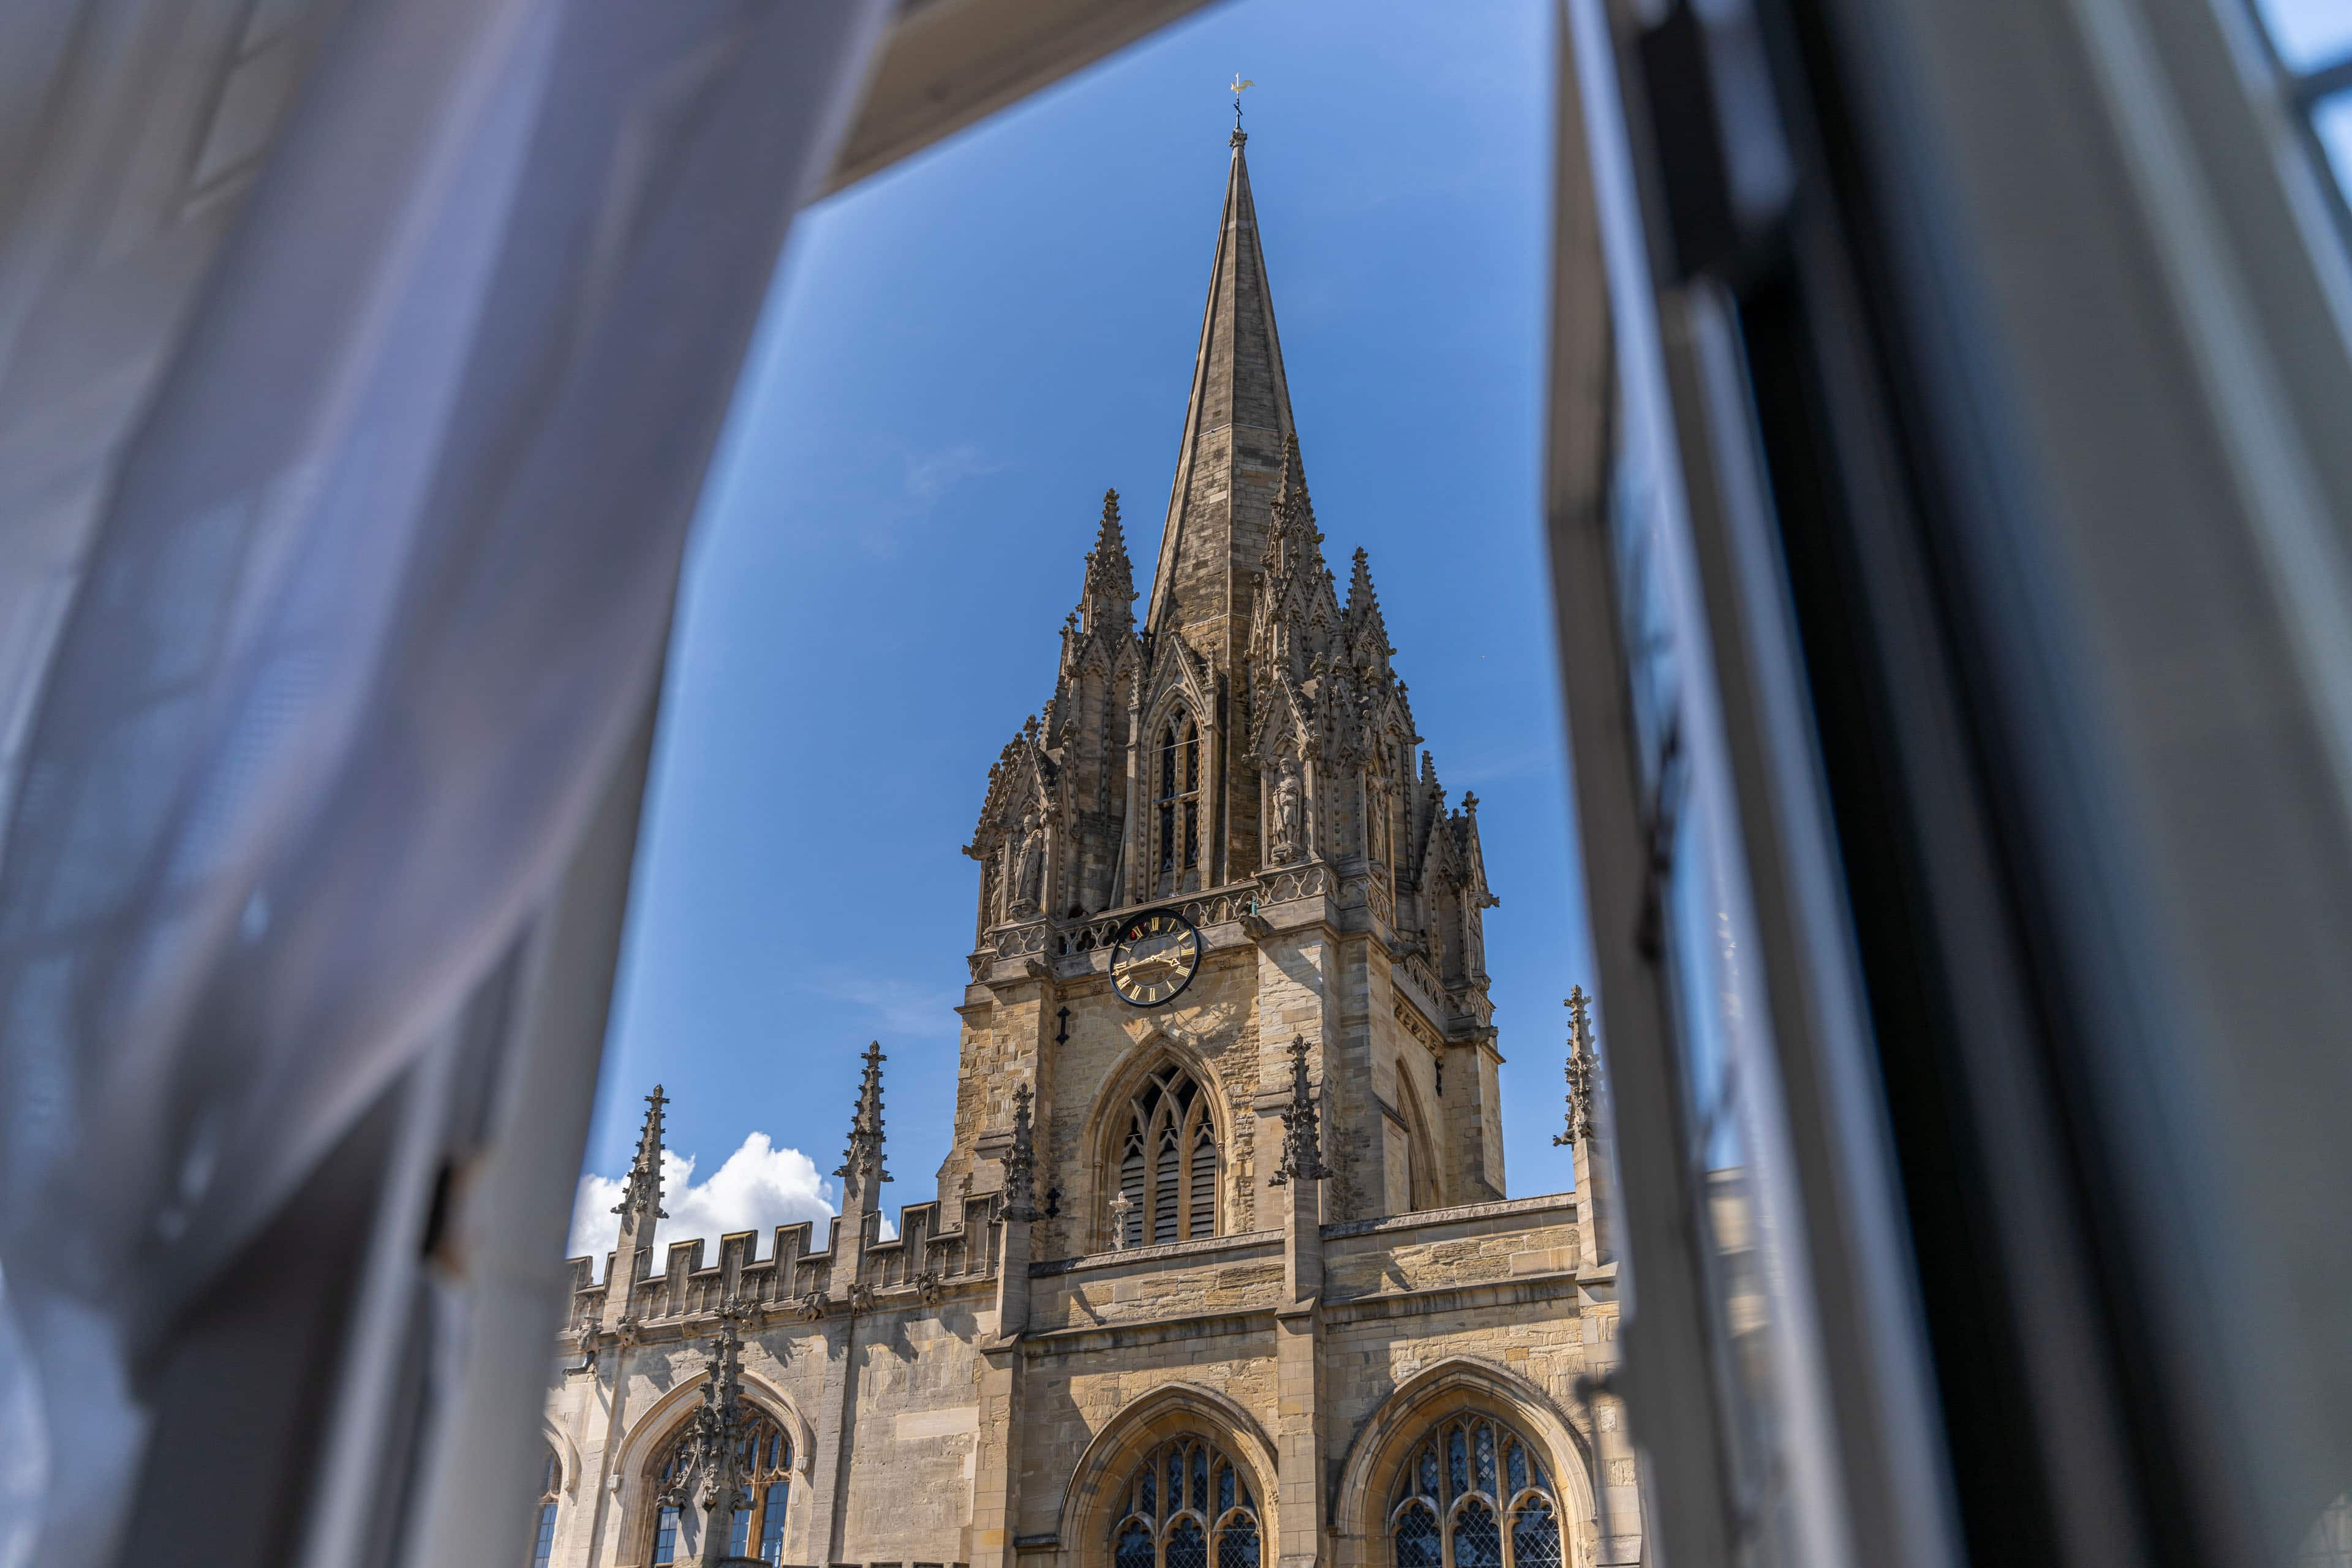 A7R05869 - 2023 - Old Bank Hotel - Oxford - High Res - Window Spires View Room 22 University Church of St Mary the Virgin - Web Hero